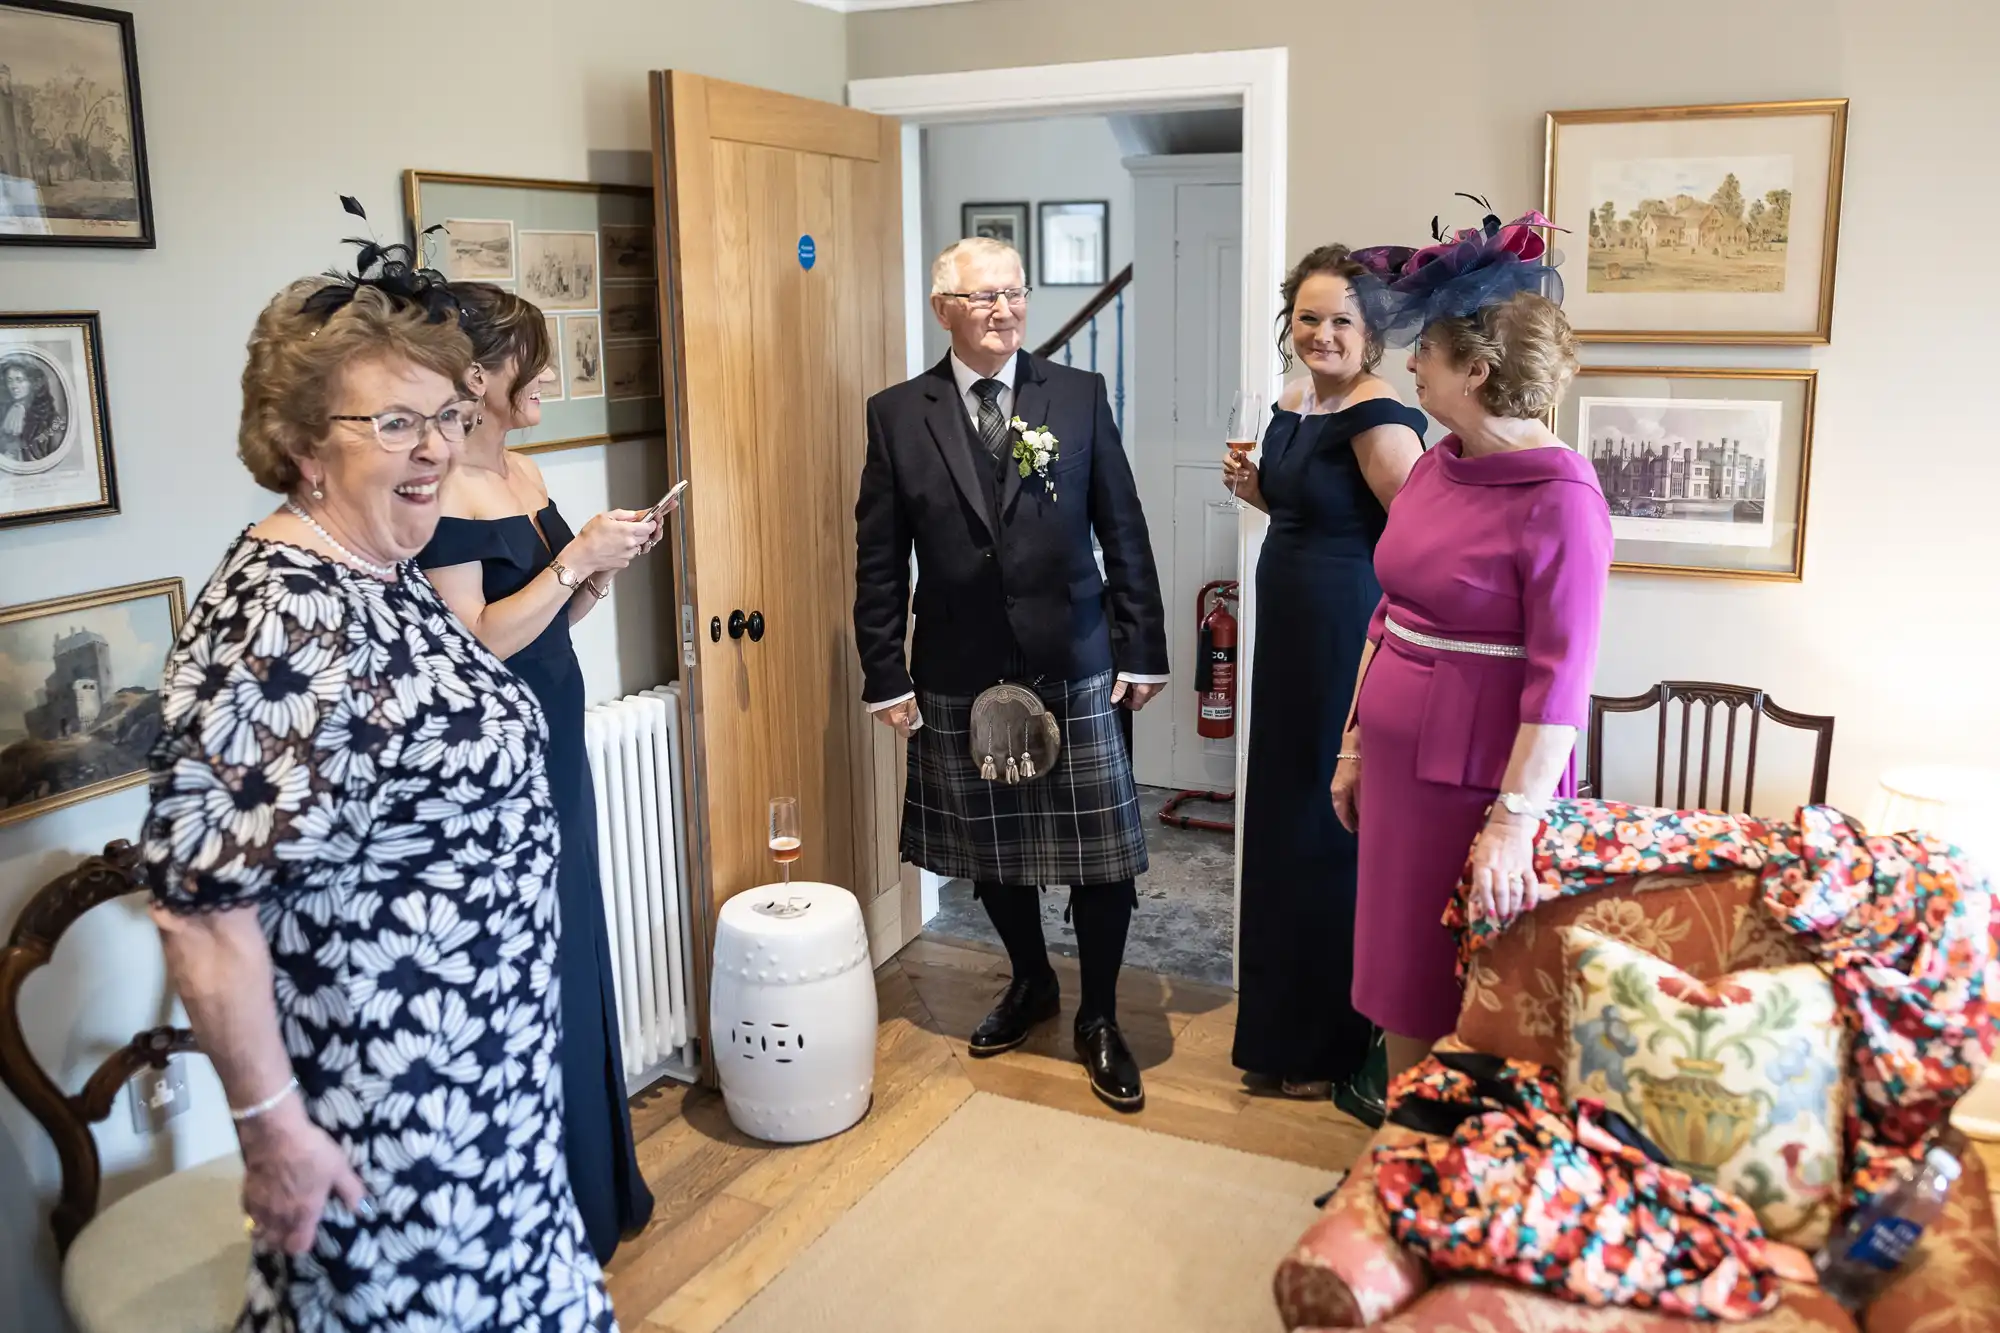 An elderly man in a kilt and three women in dresses and hats smiling and greeting each other in a cozy living room.